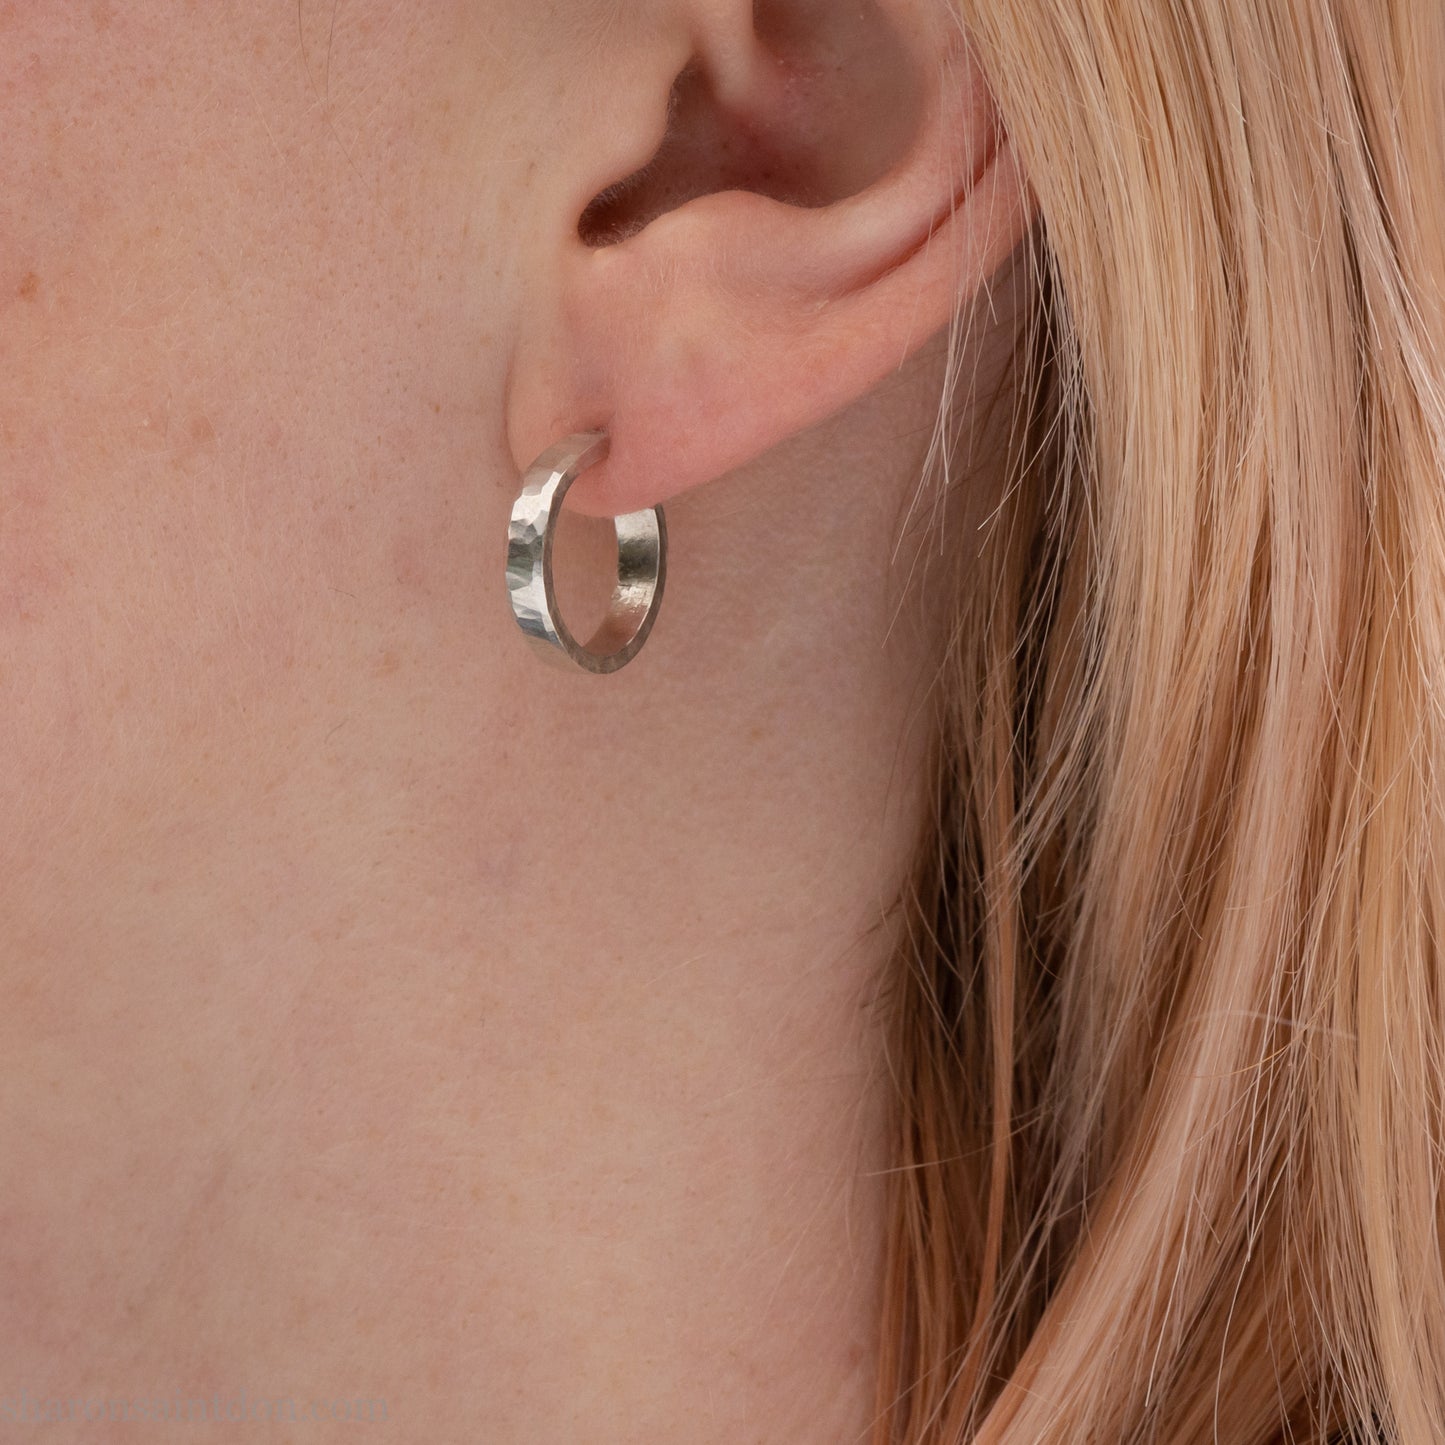 925 sterling silver hoop earrings; chunky, thick, small, 16mm x 3mm wide. handmade by Sharon SaintDon in North America